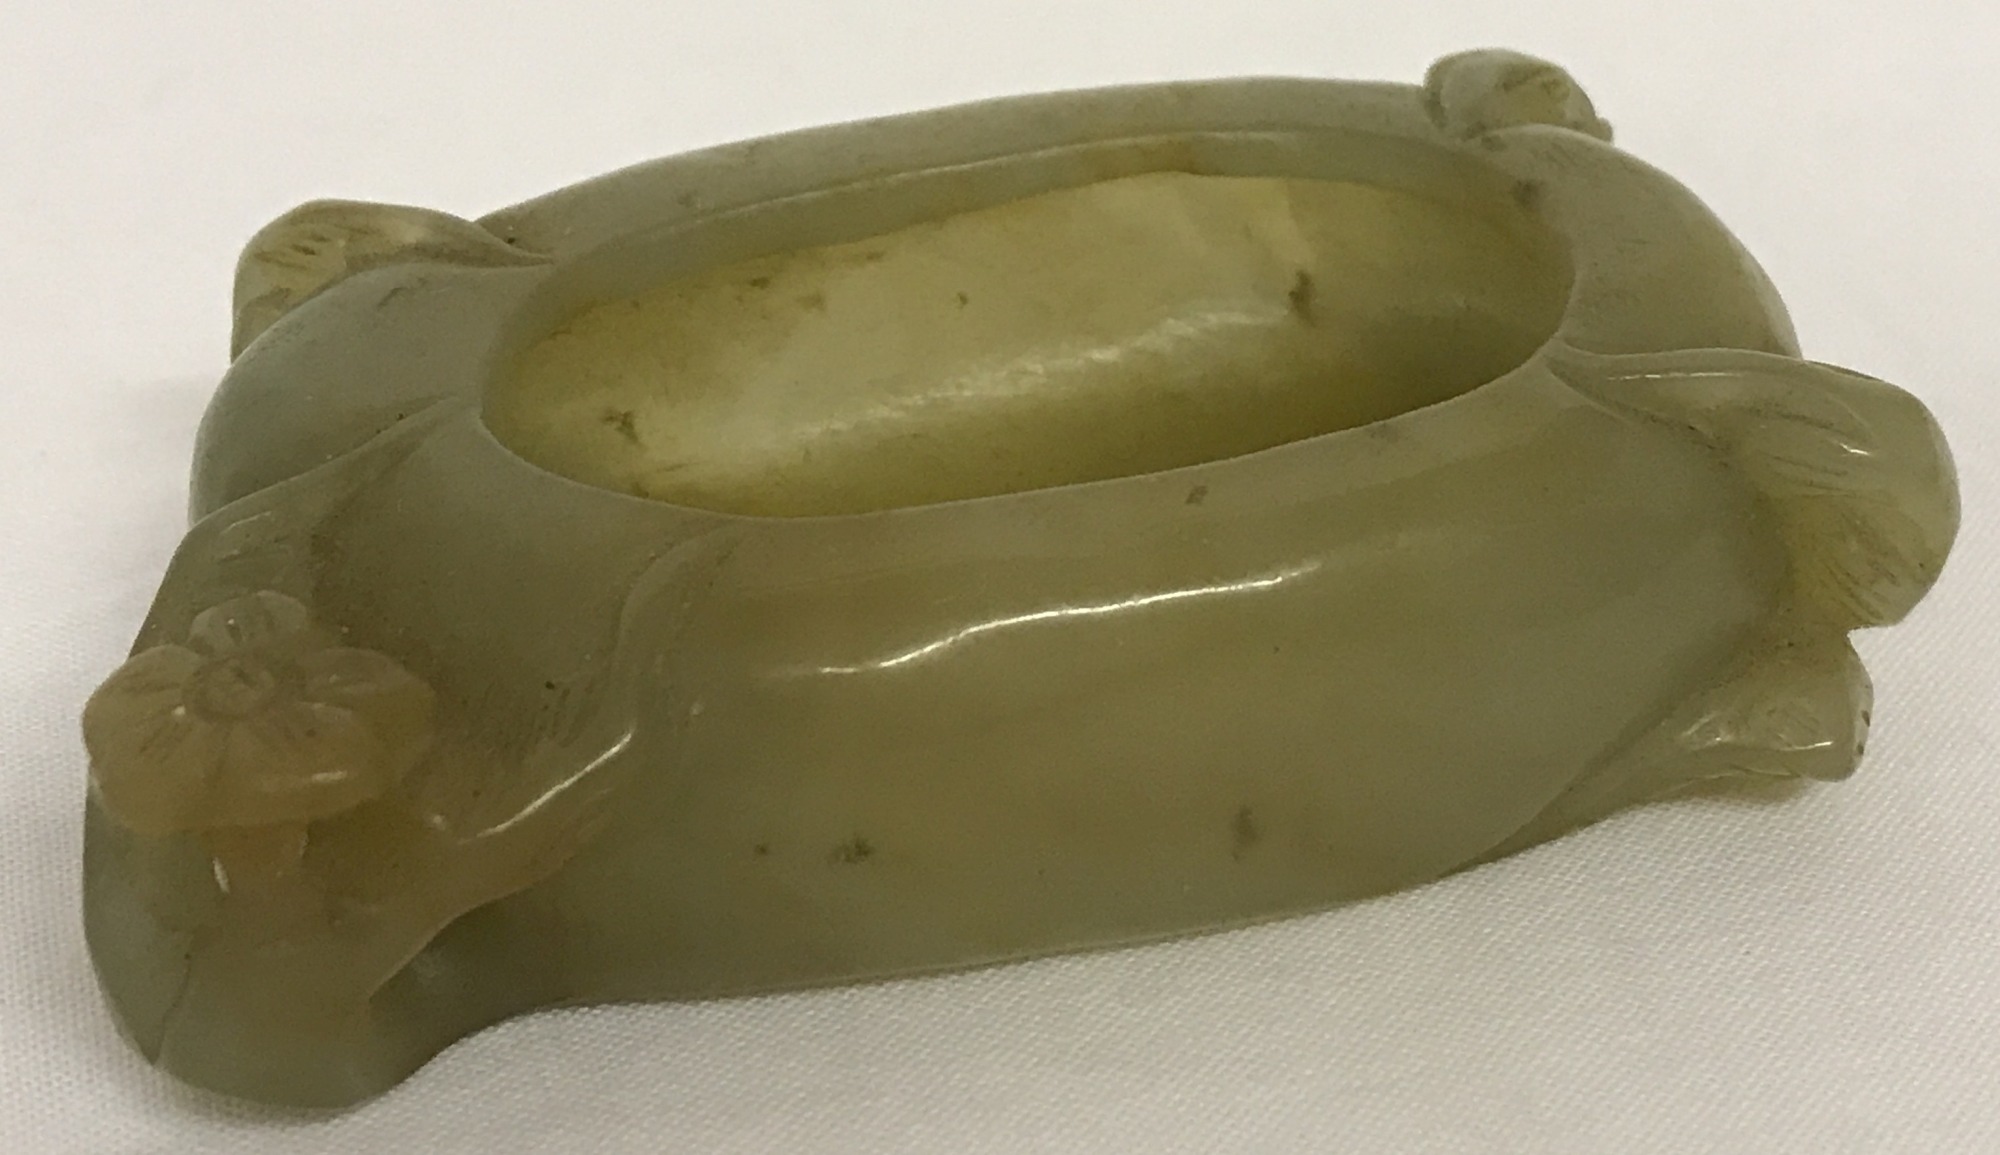 A carved jade brush washer with floral detail.